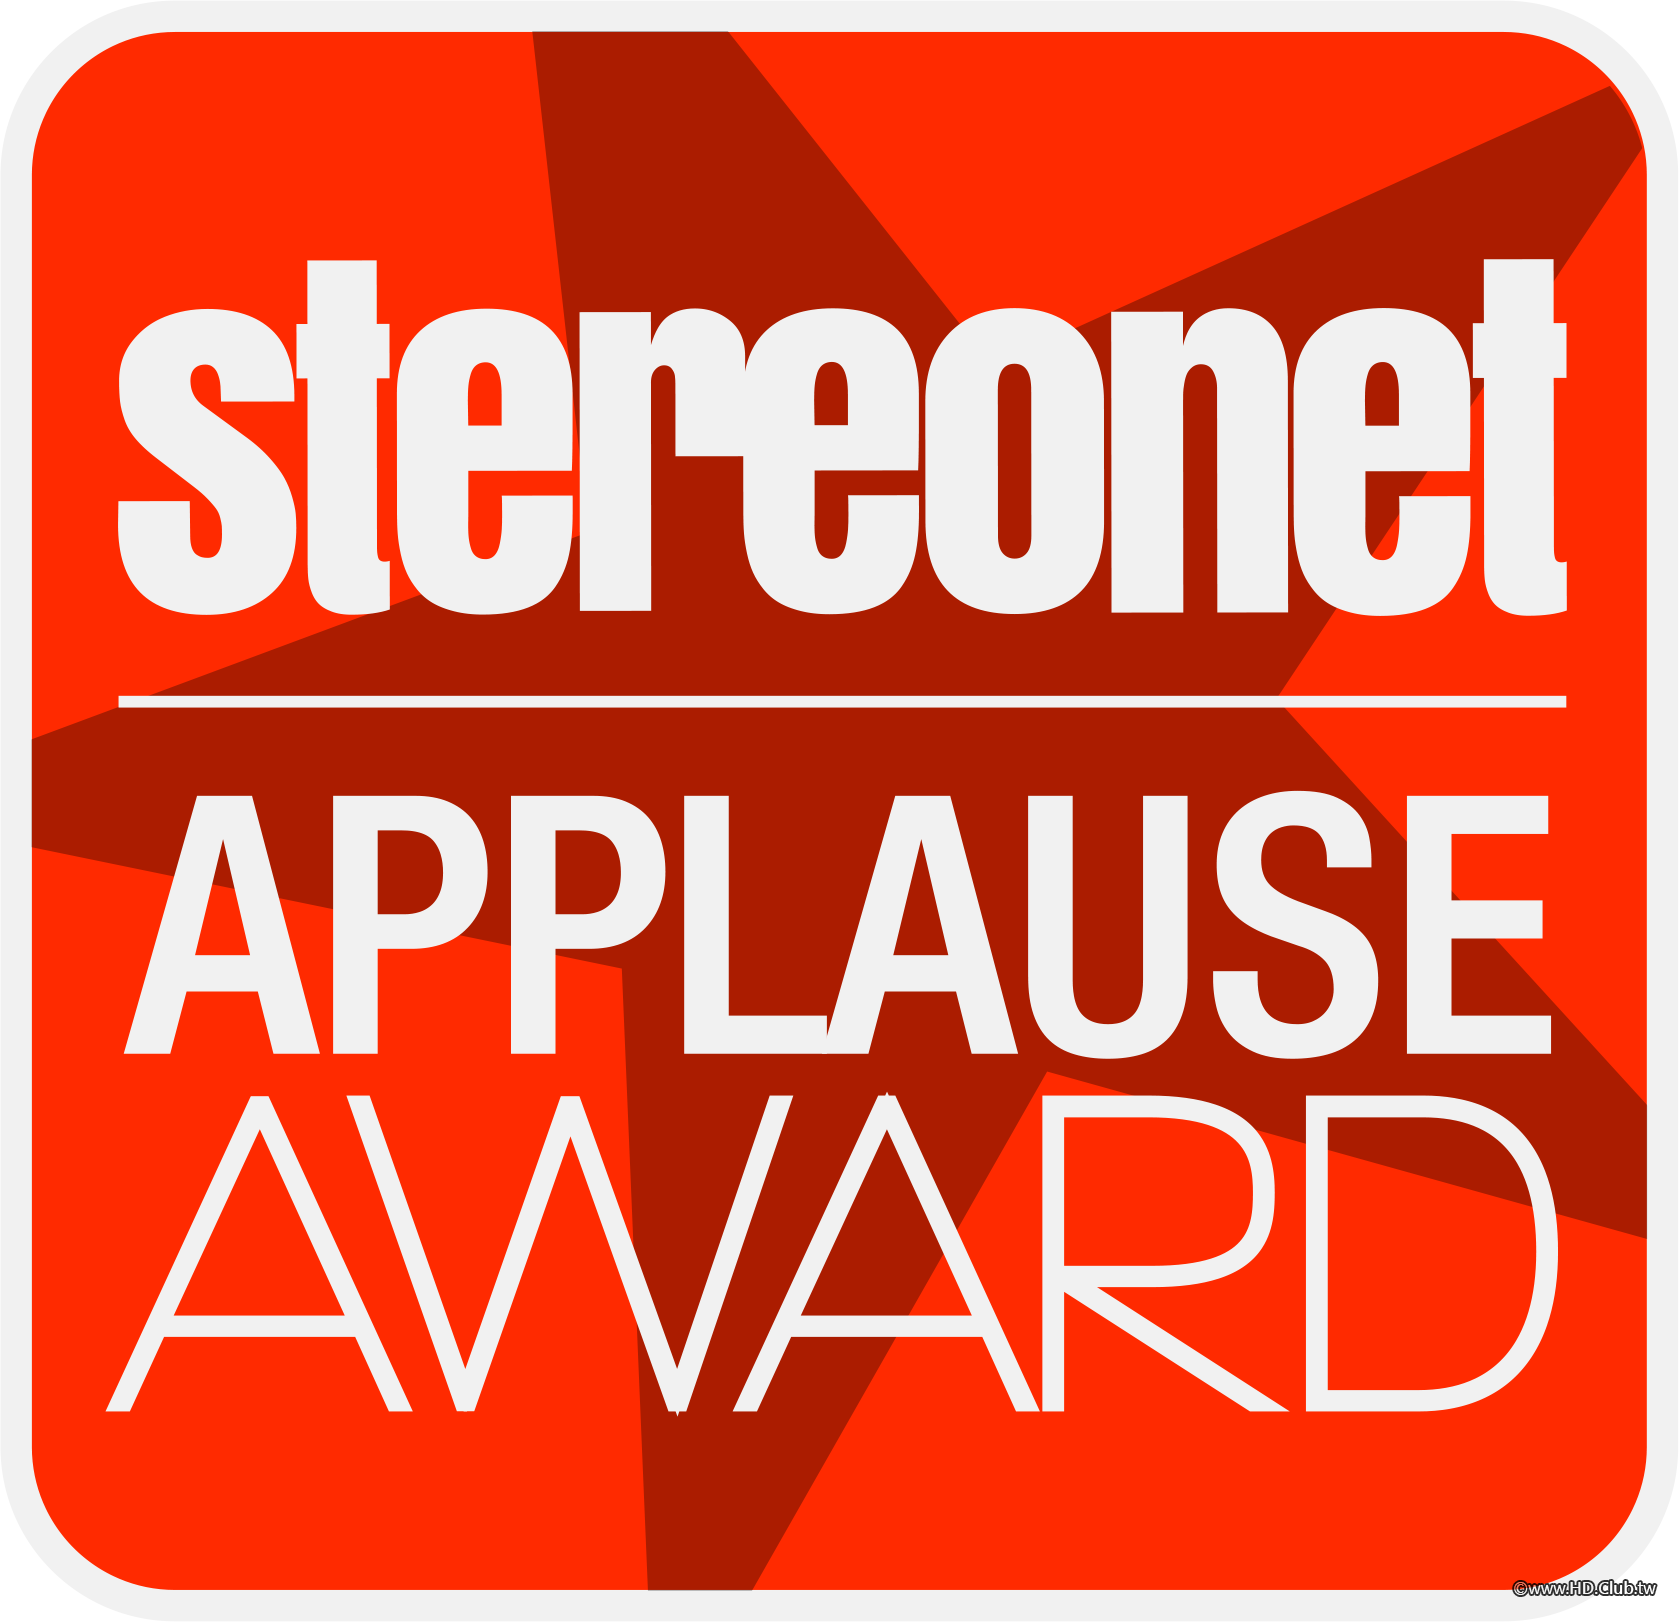 StereoNET_Applause_Award_2021.png